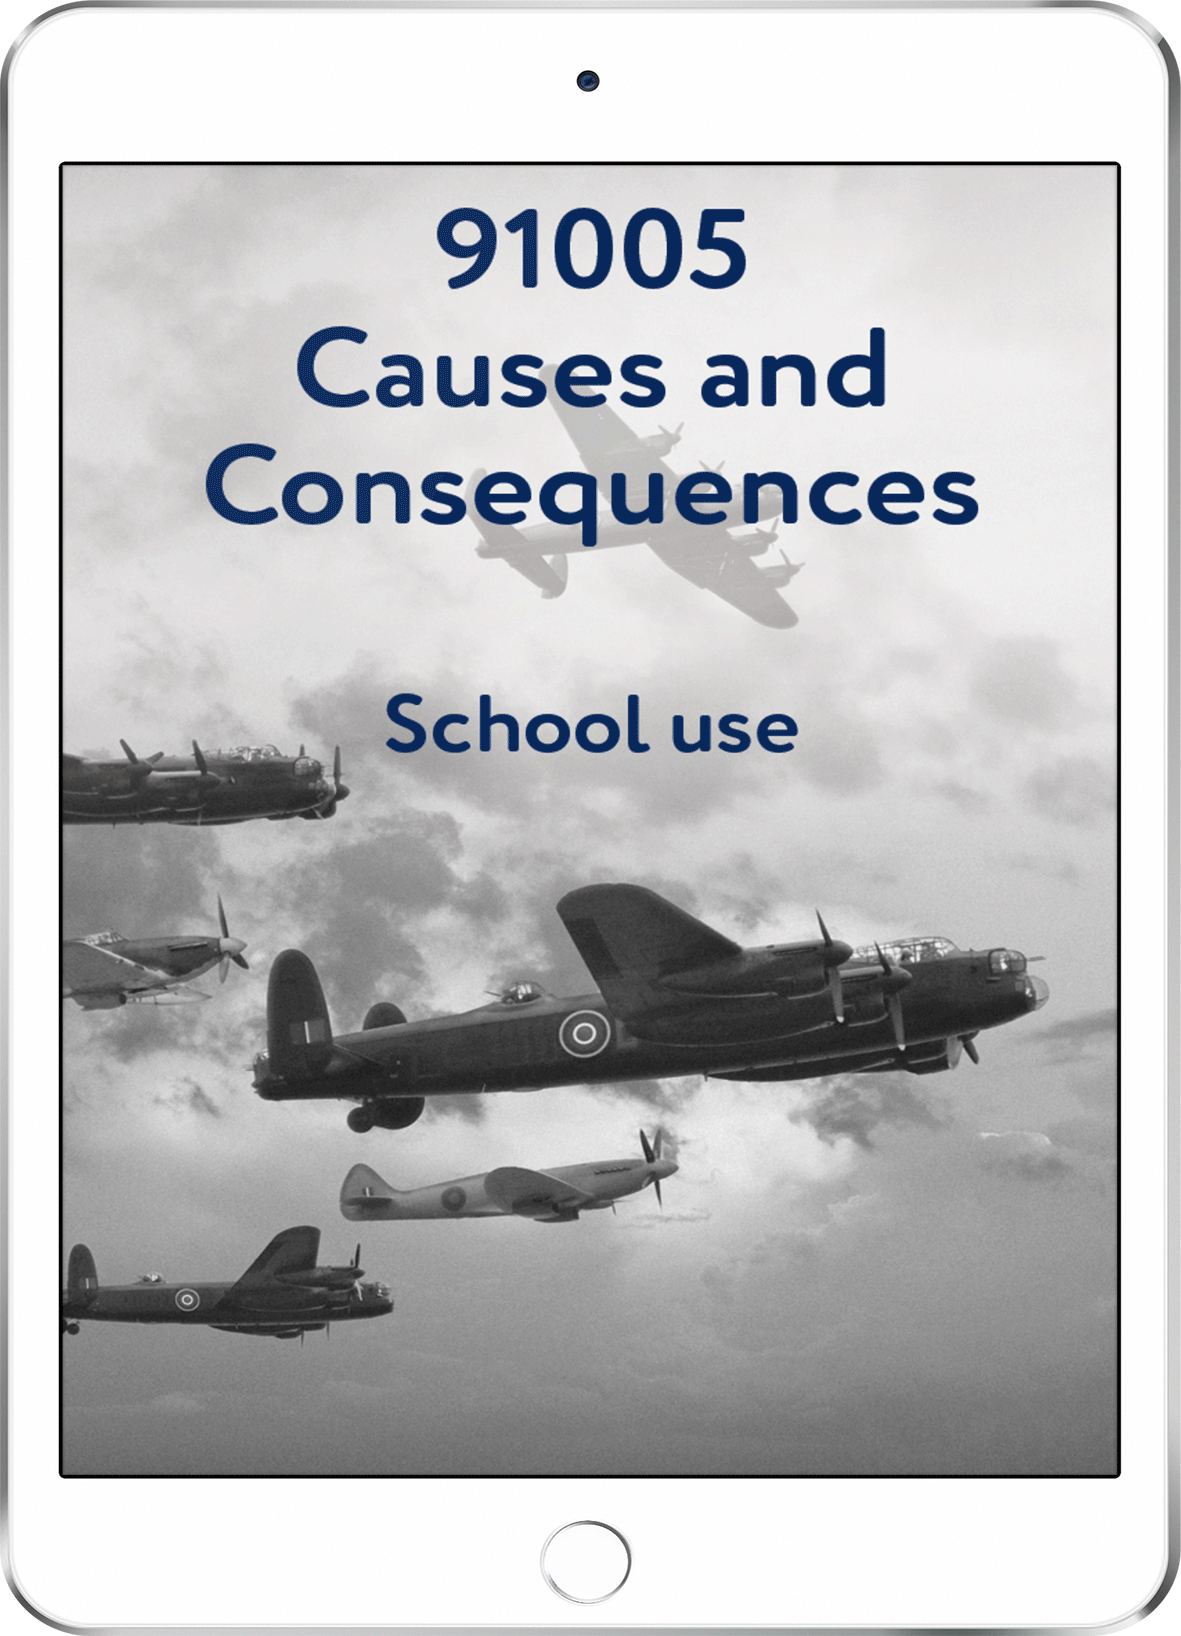 91005 Causes and Consequences - School Use